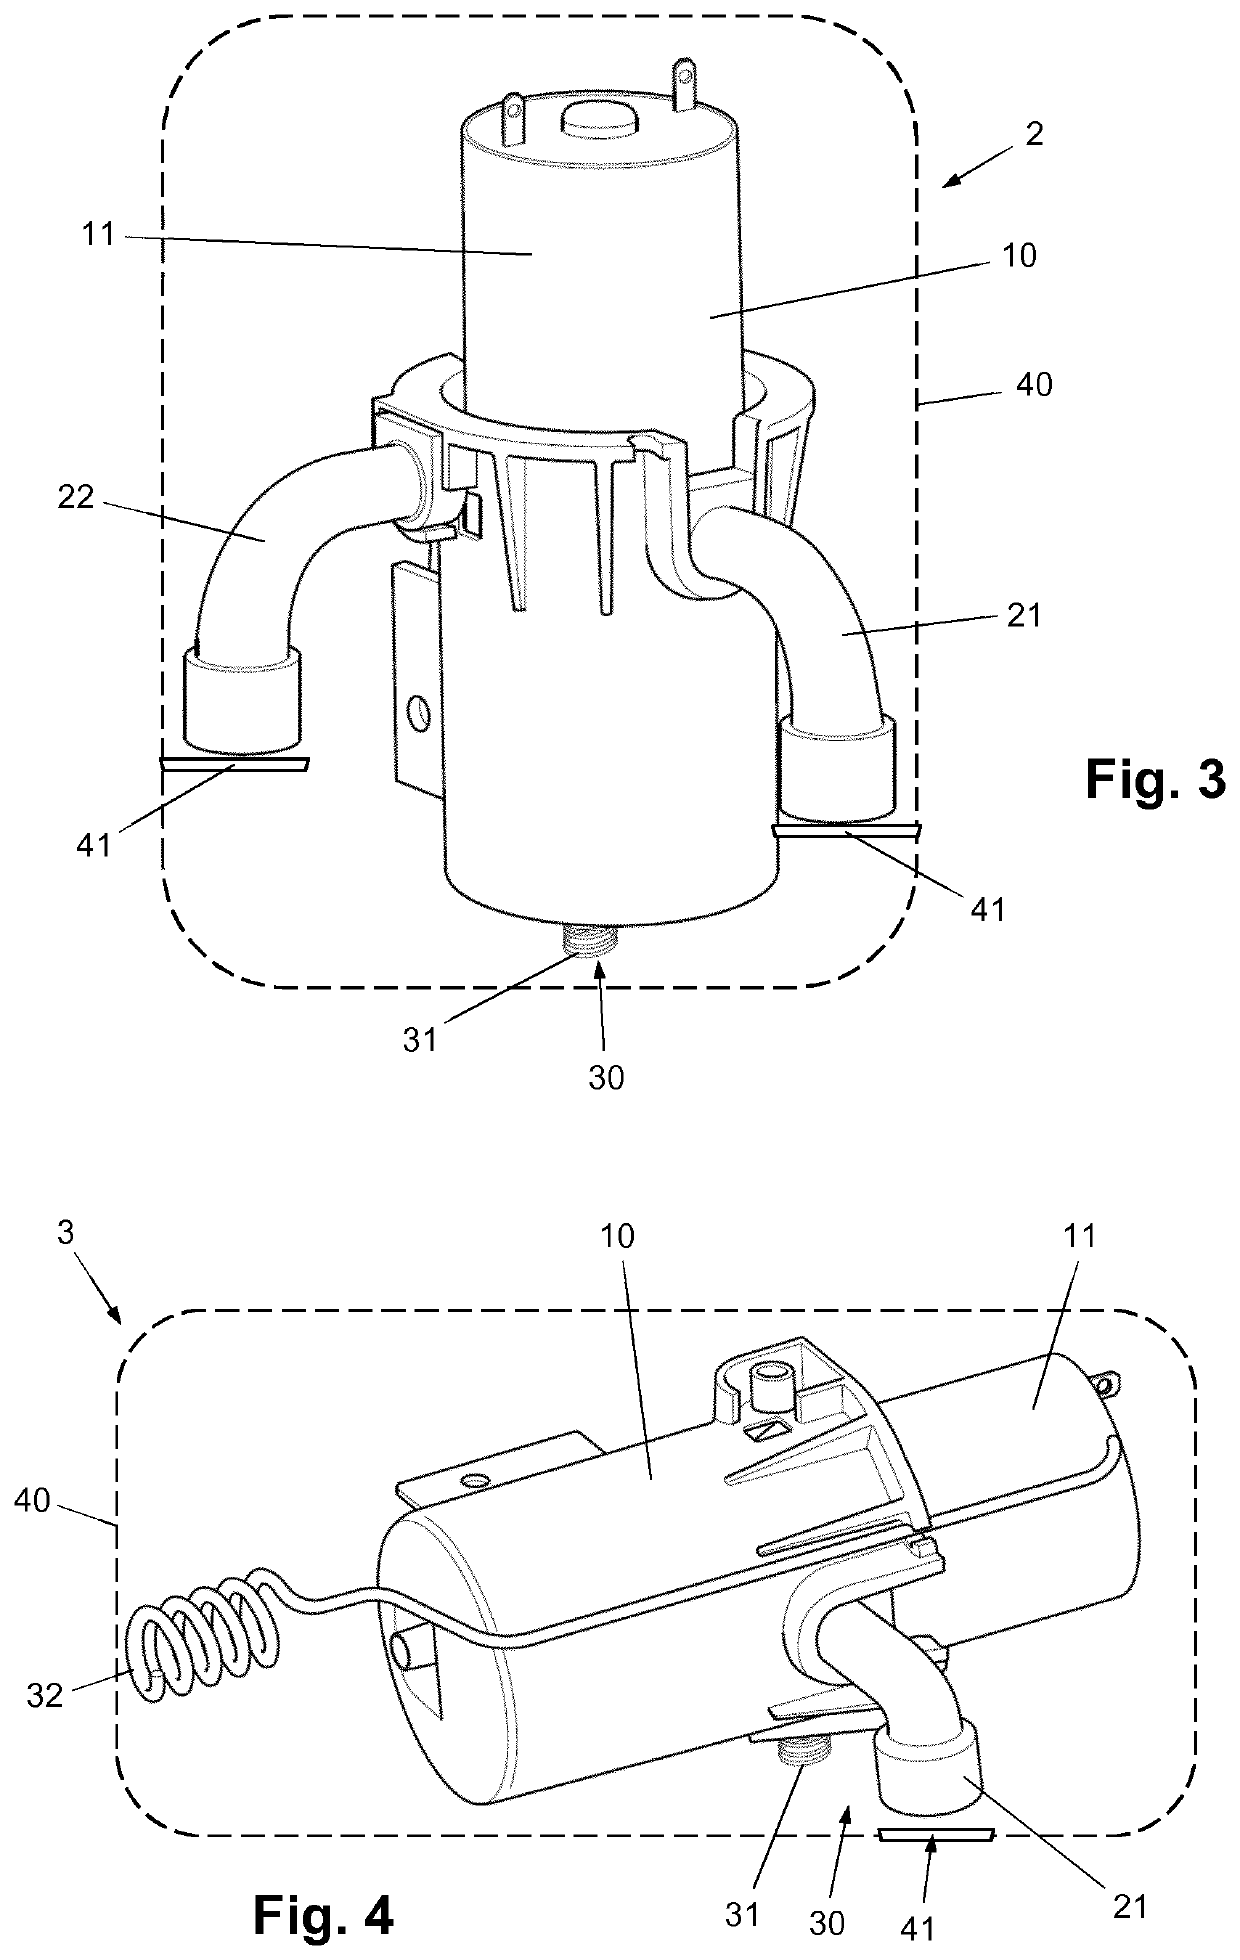 Pump device, comprising a pump and a housing accommodating the pump